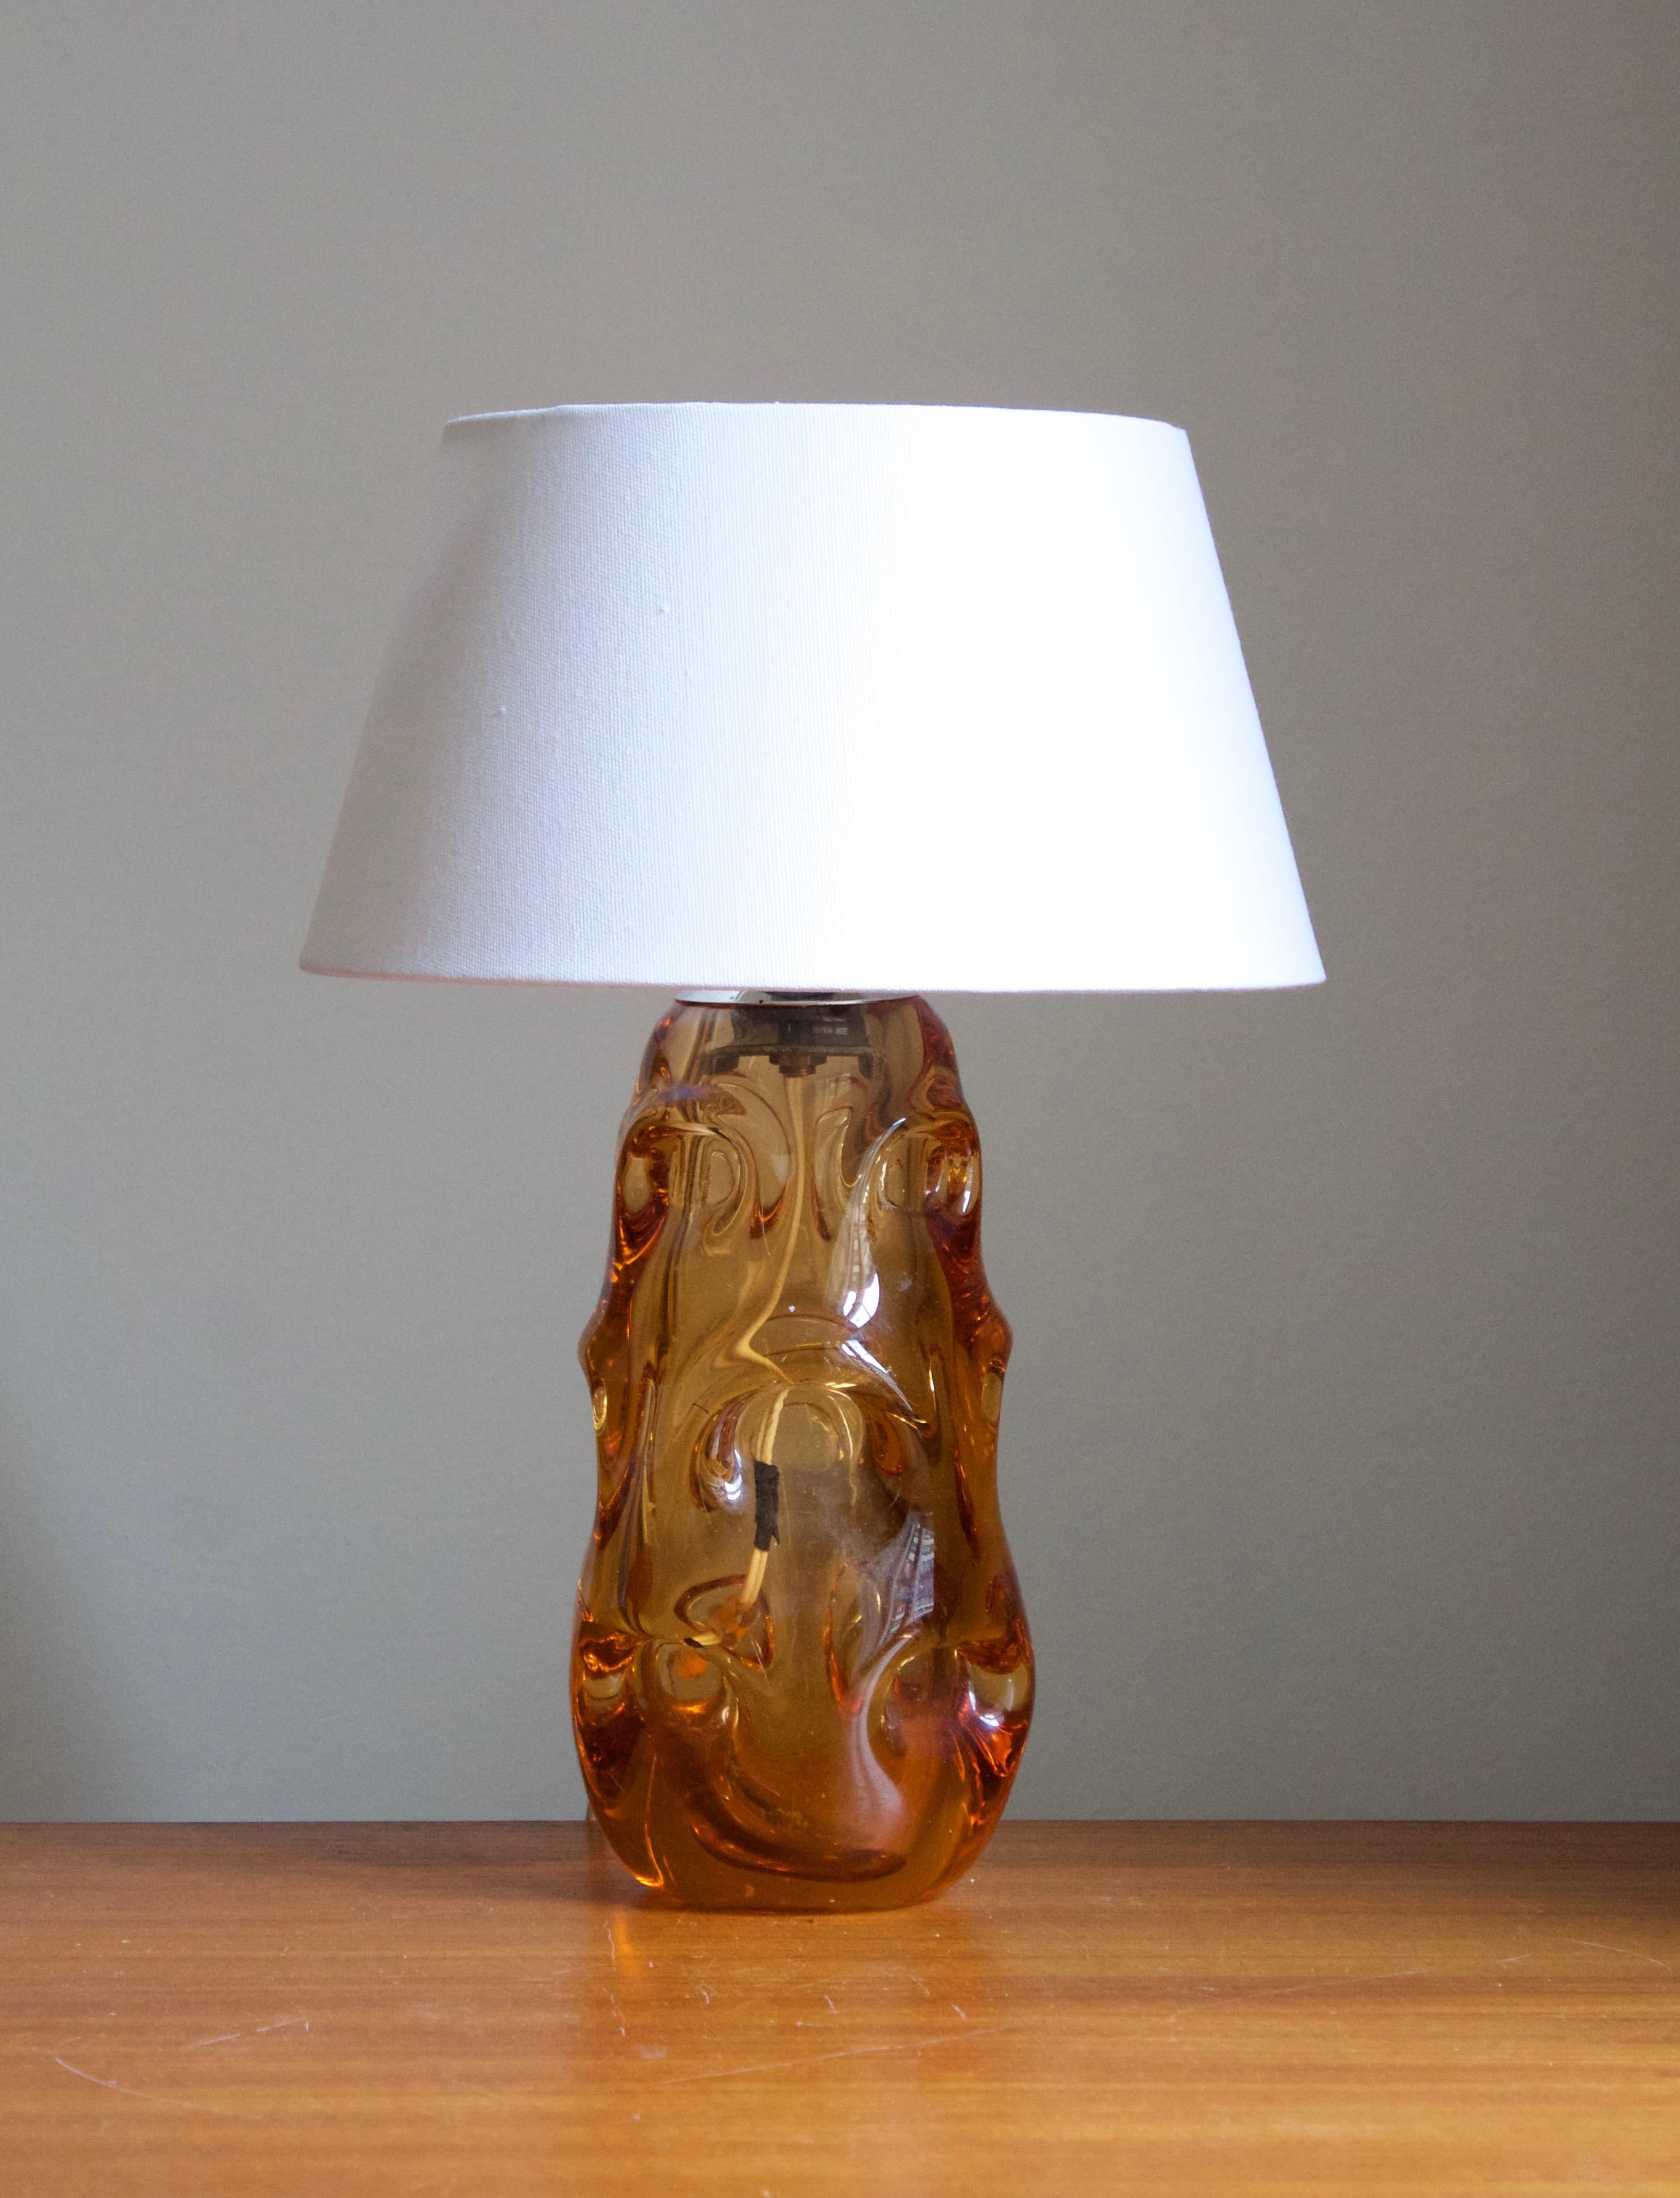 An organic table lamp in highly artistic form. Design attributed to Börne Augustsson, Åseda Sweden, 1950s. 

Stated dimensions exclude lampshade, height includes socket. Sold without lampshade.